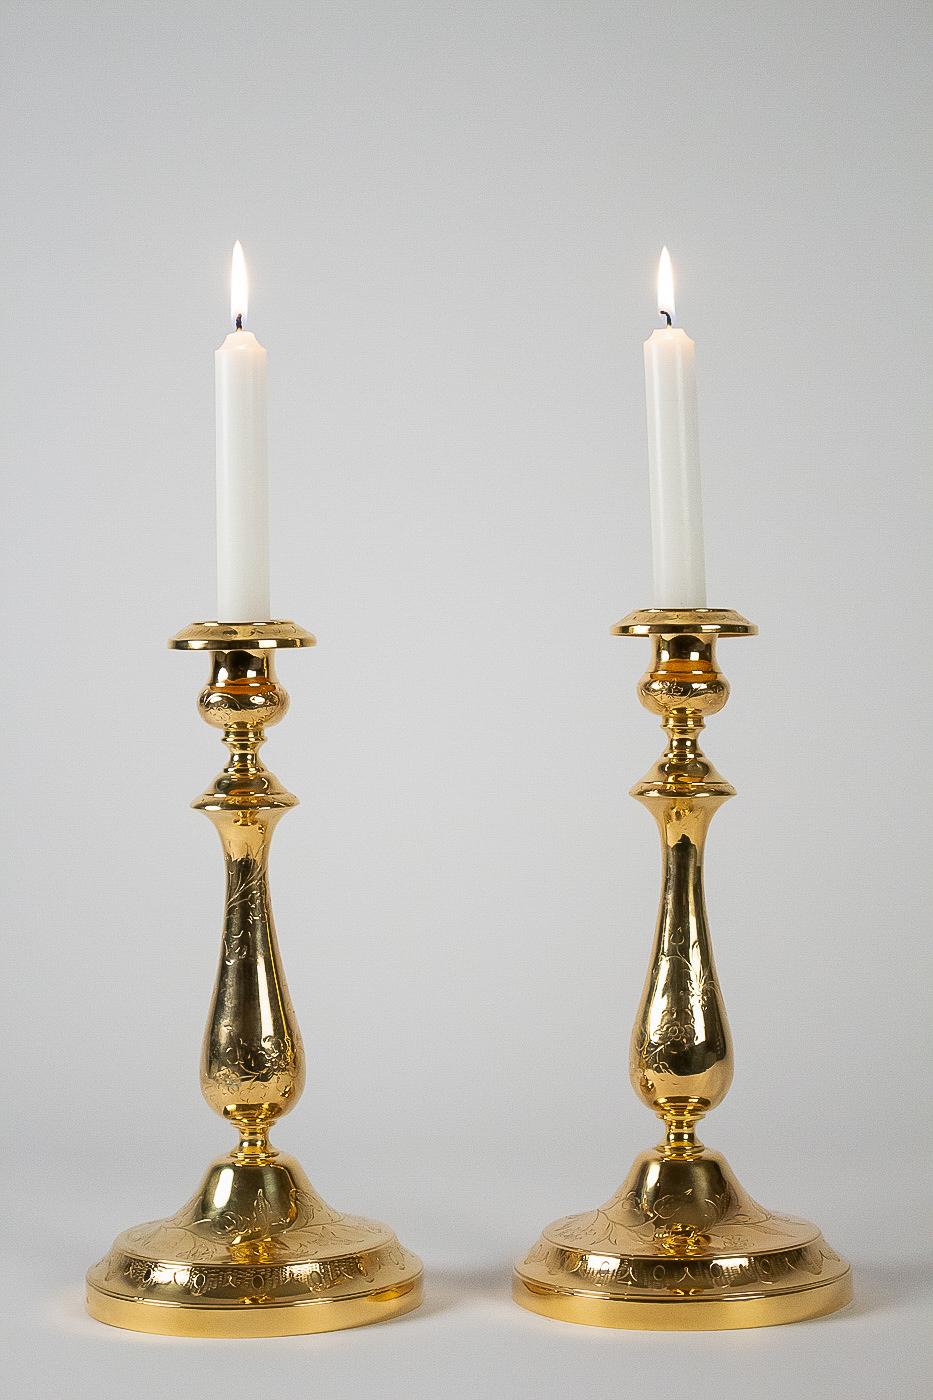 Maison Christofle, late 19th century pair of silvered and gilted metal candlesticks.

An elegant pair silvered and gilded metal candlesticks, finely chiseled of flowers and branching.
Lovely French work by Maison Christofle, late-19th century,